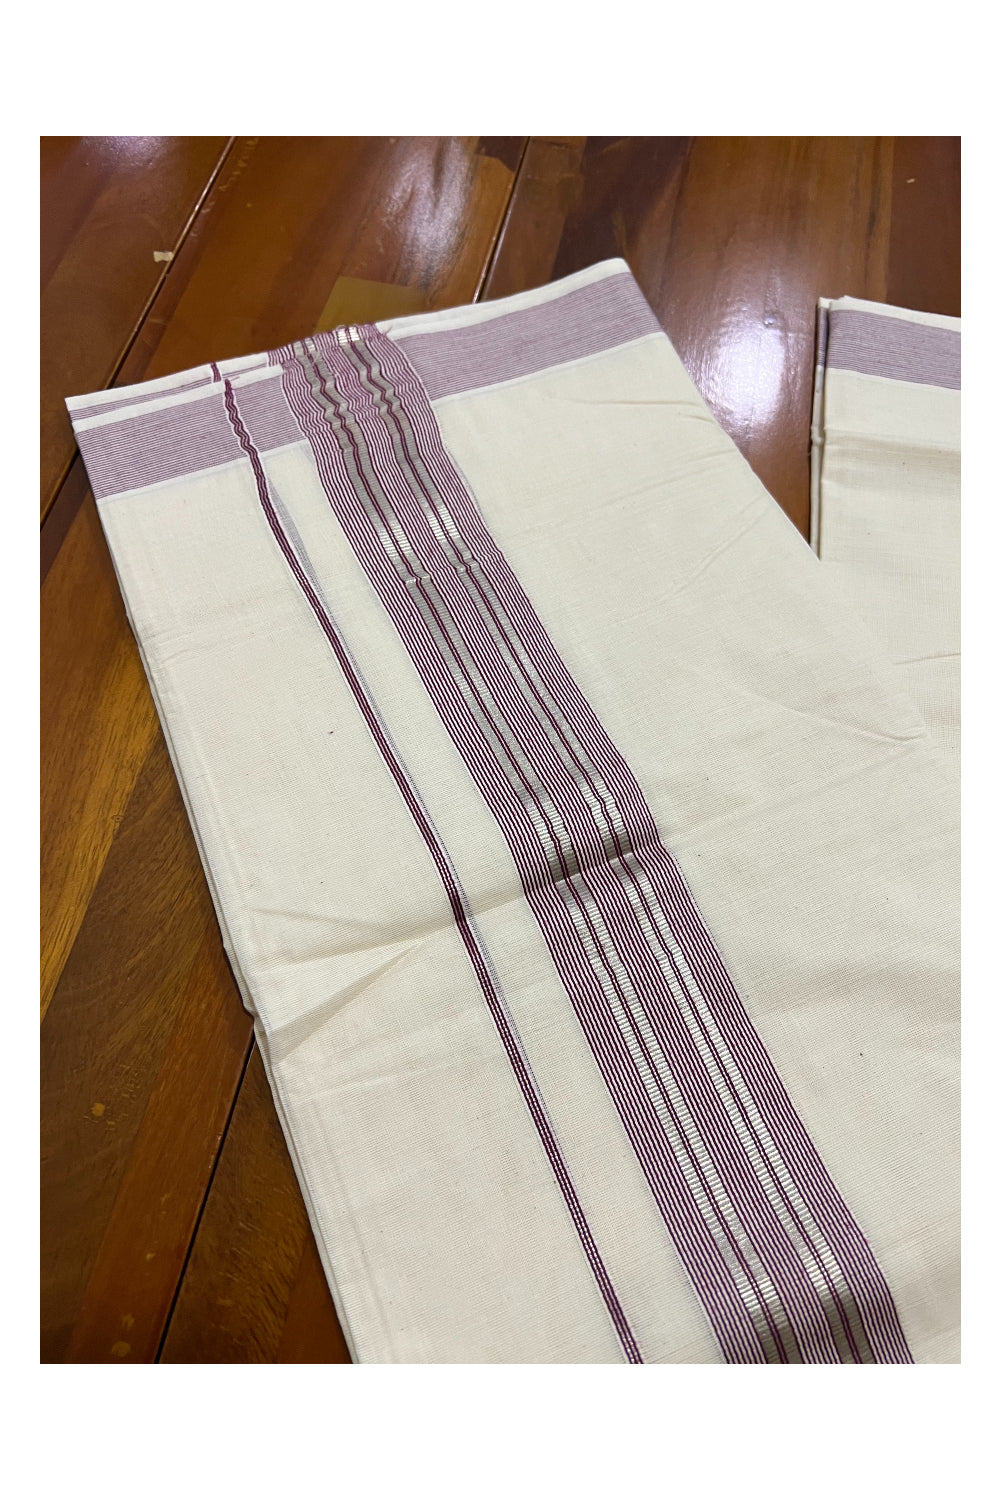 Off White Kerala Double Mundu with Silver Kasavu and Maroon Line Border (South Indian Dhoti)